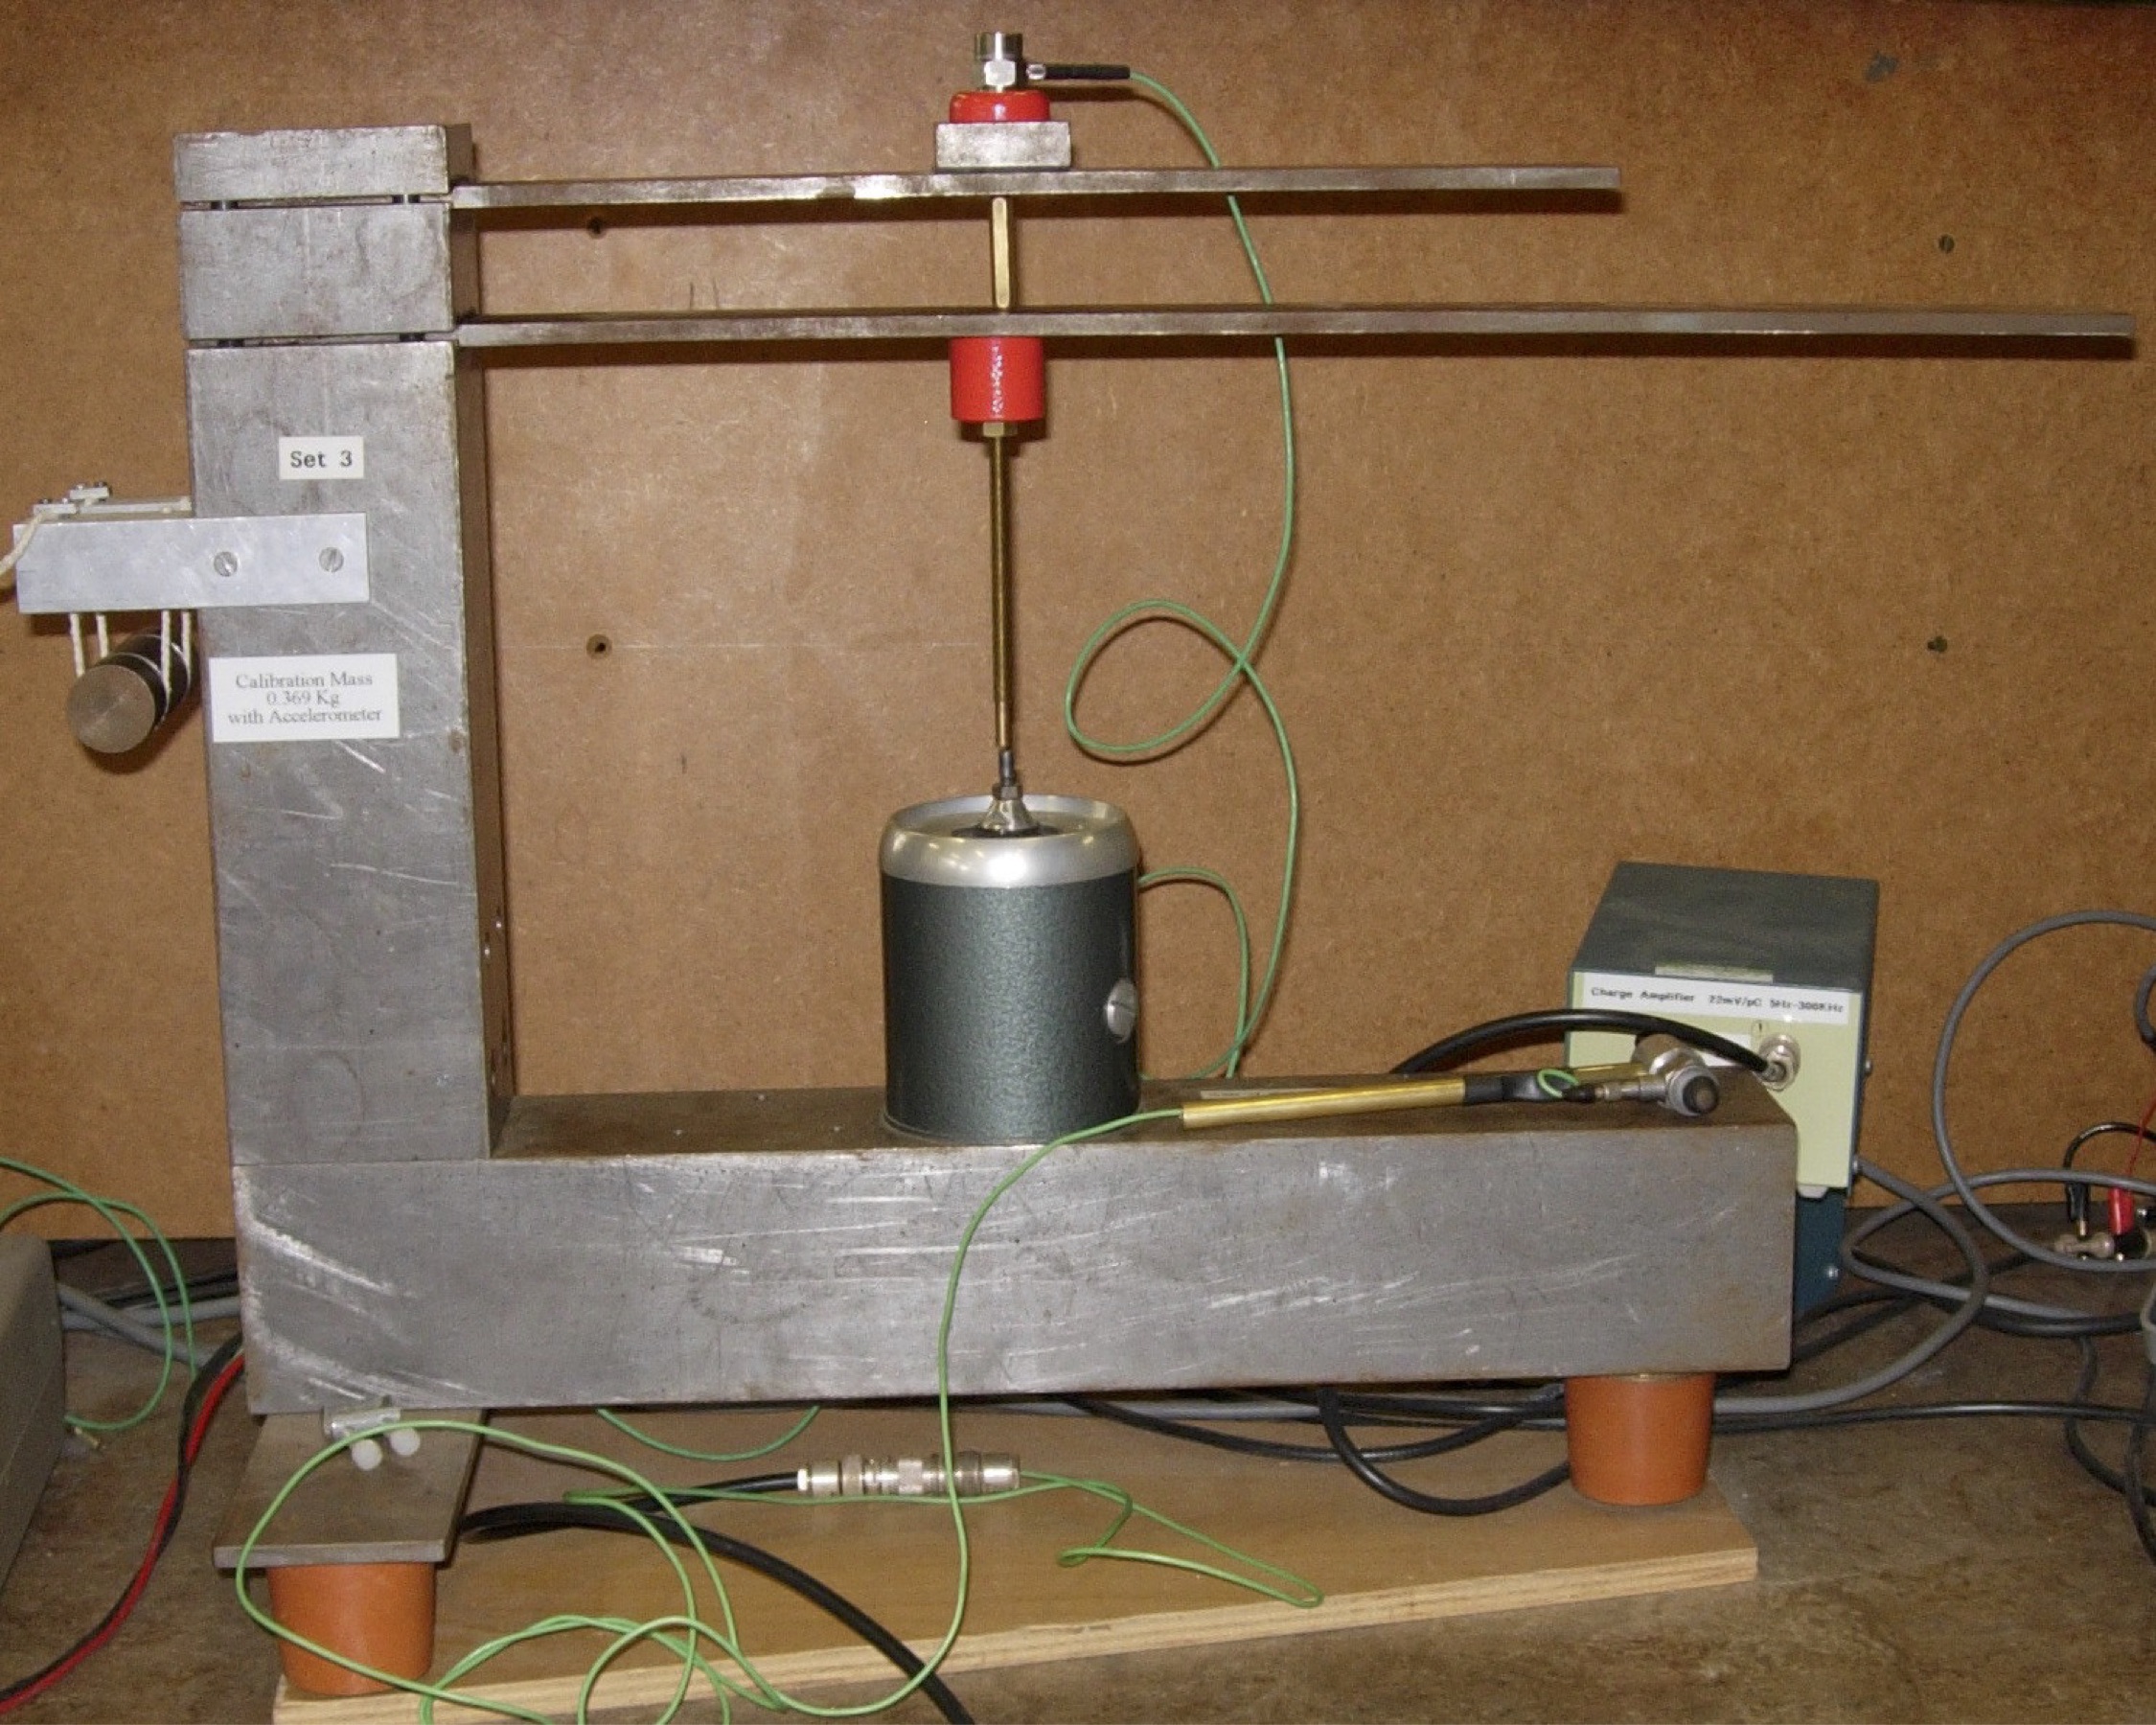 An experimental system used in out study